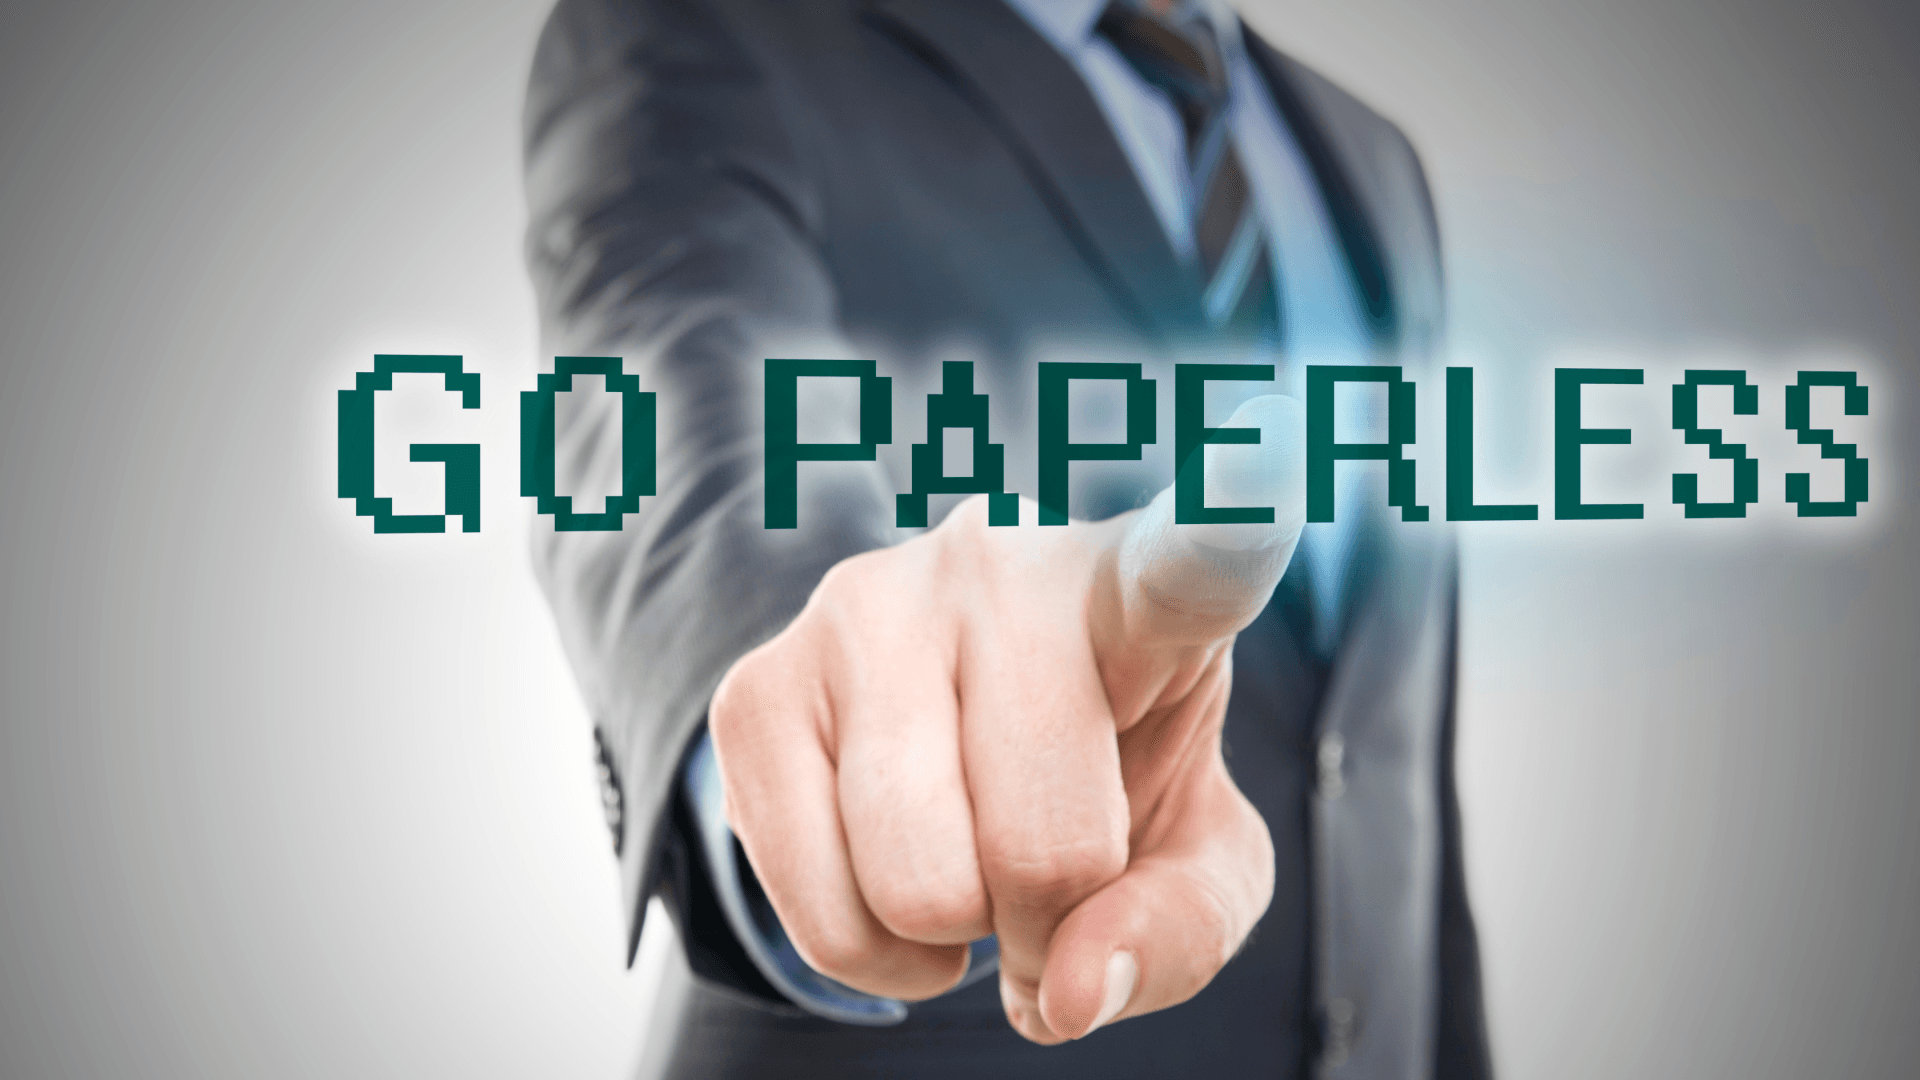 paperless pay